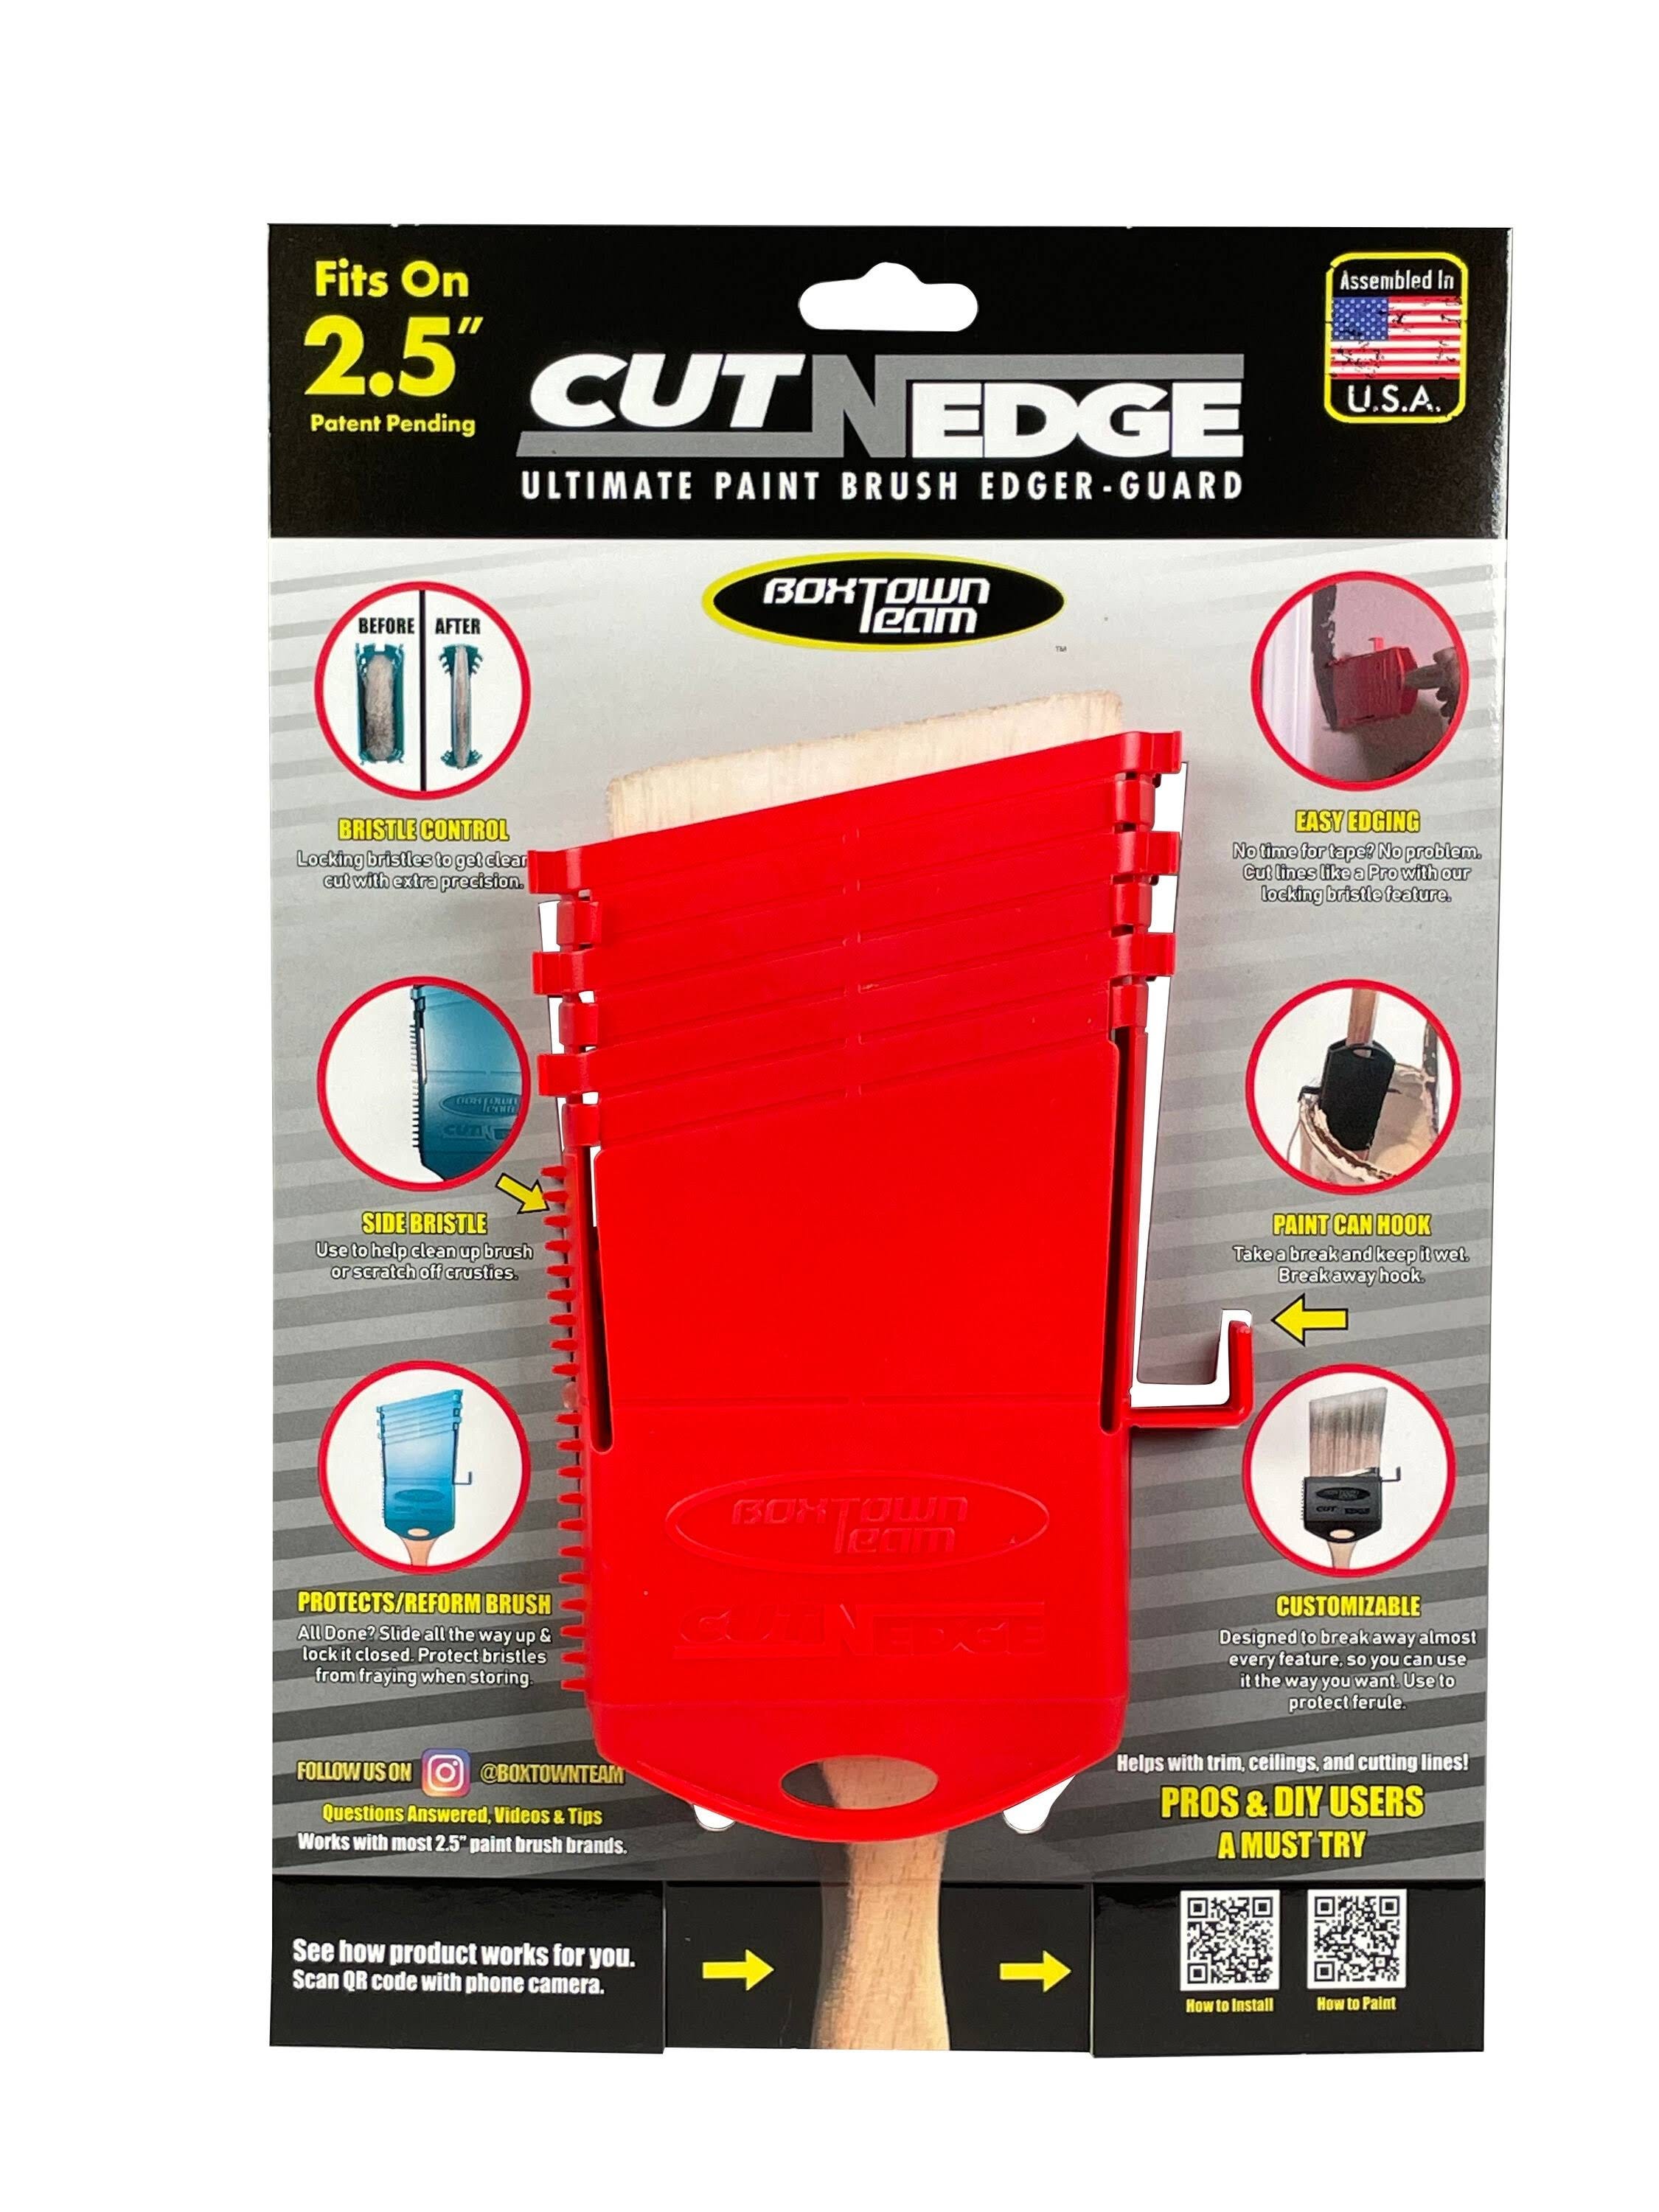 Ultimate Paint Edging Tool with 2-in-1 Design | Image